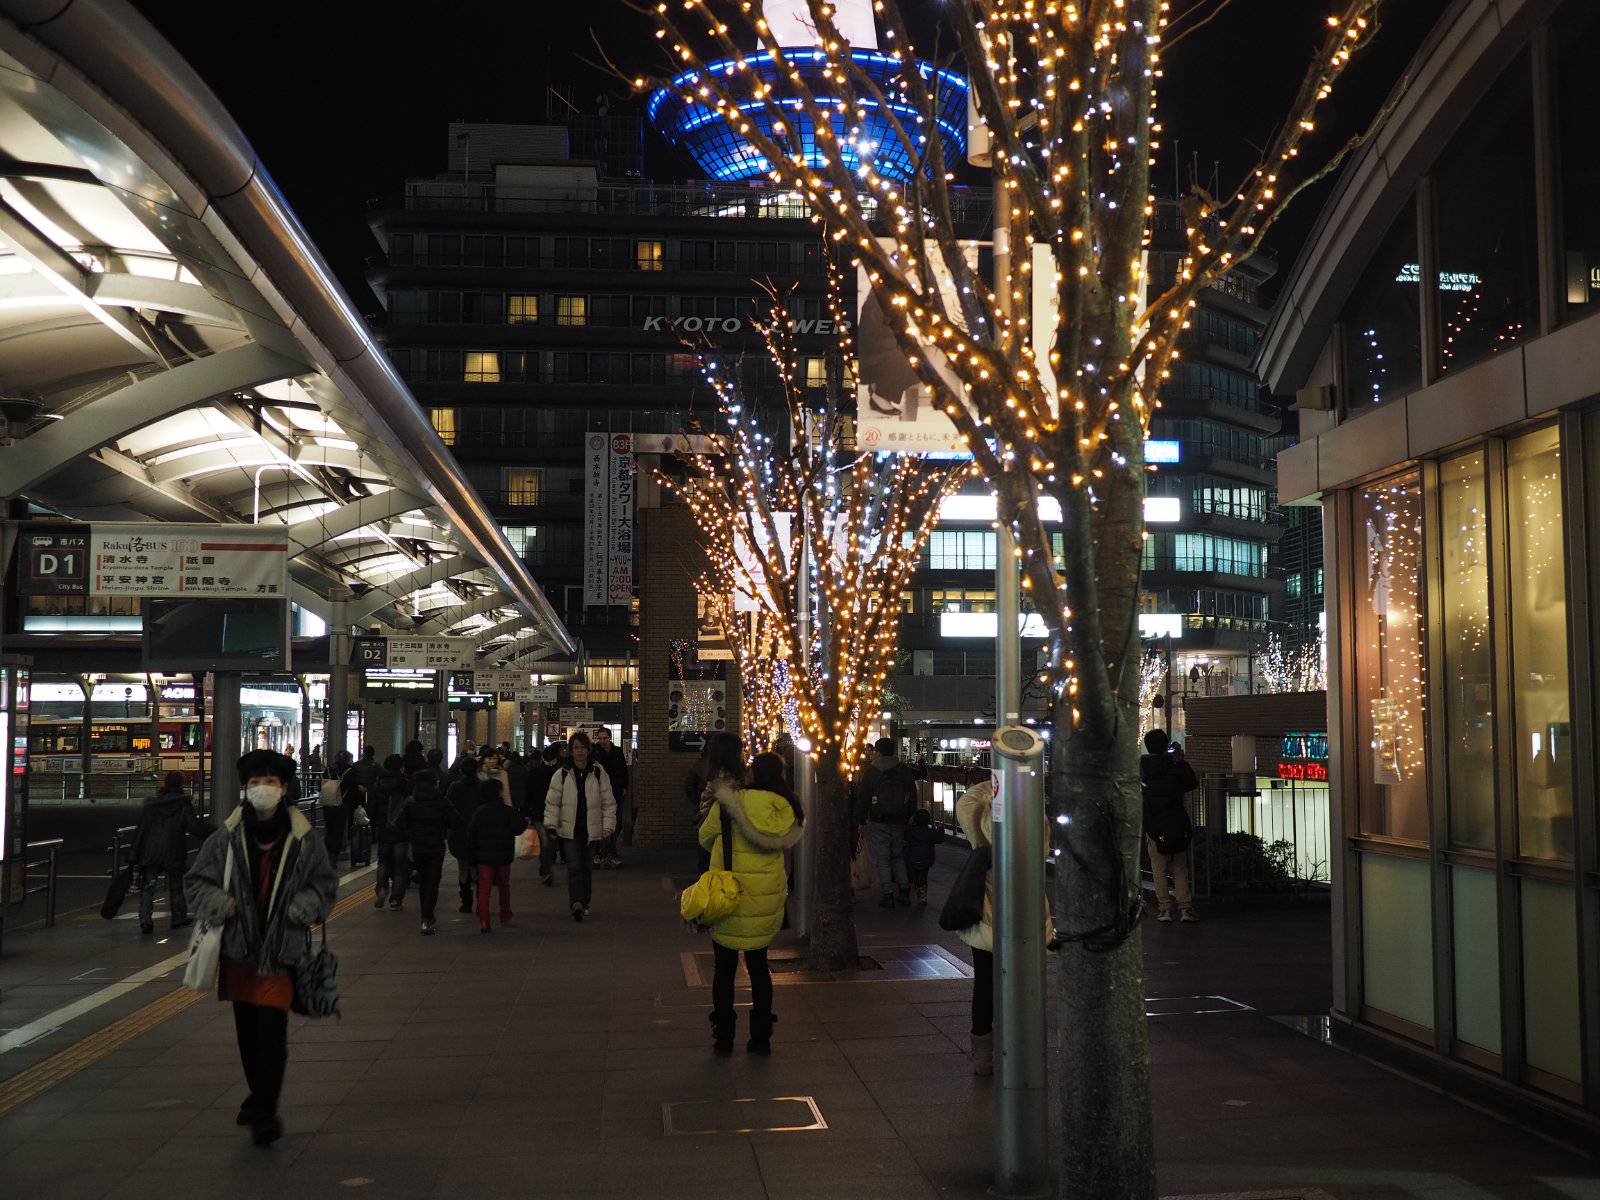 Trees covered in fairy lights near the station